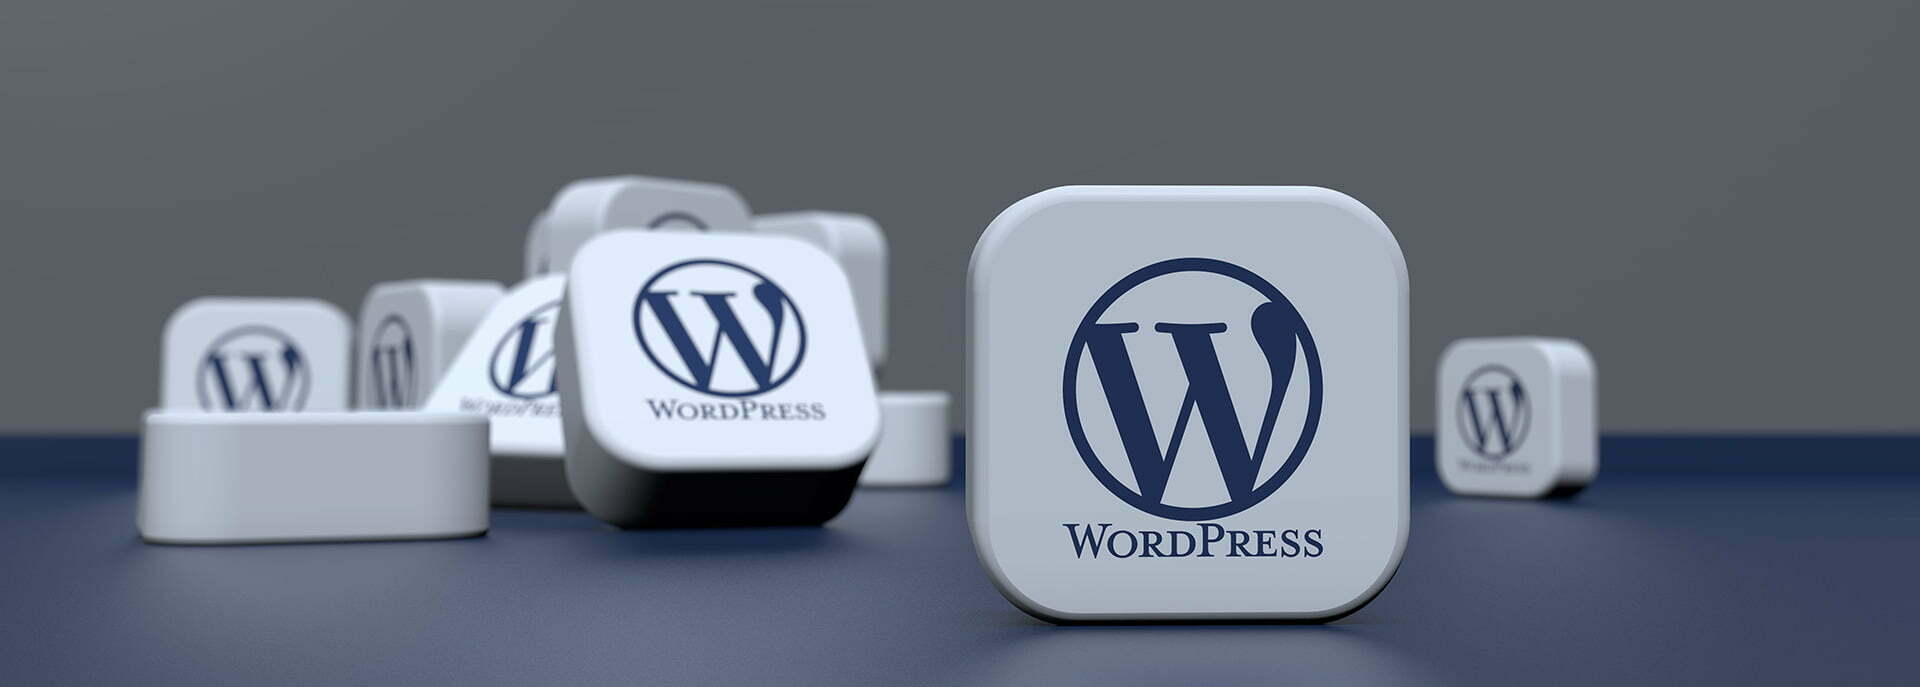 Formation WordPress Administrateur - Initiation